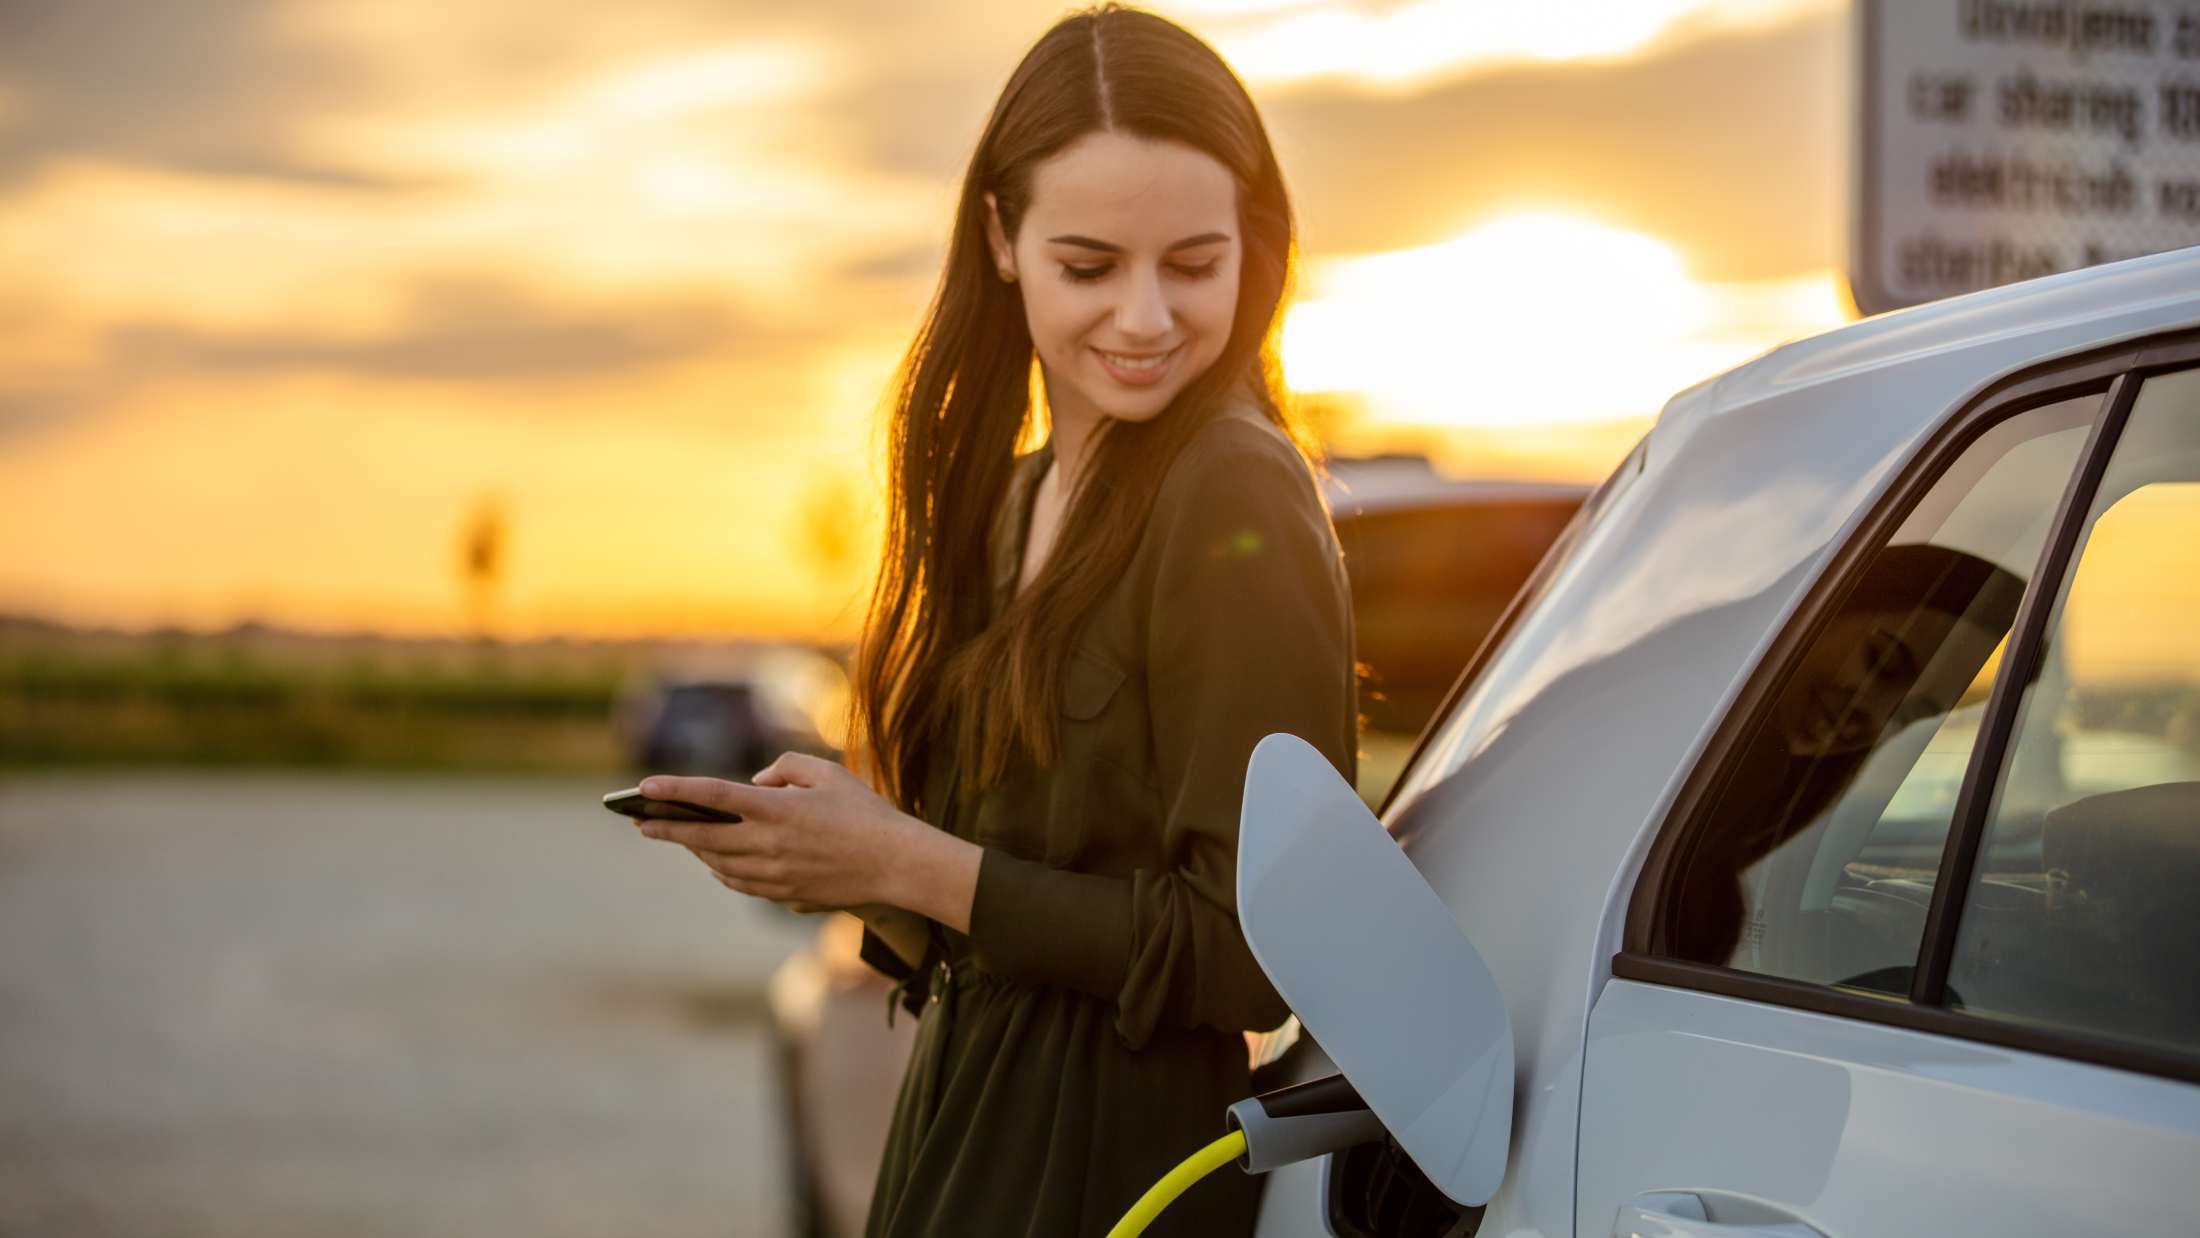 Woman waits for electric car to charge in parking lot at sunset